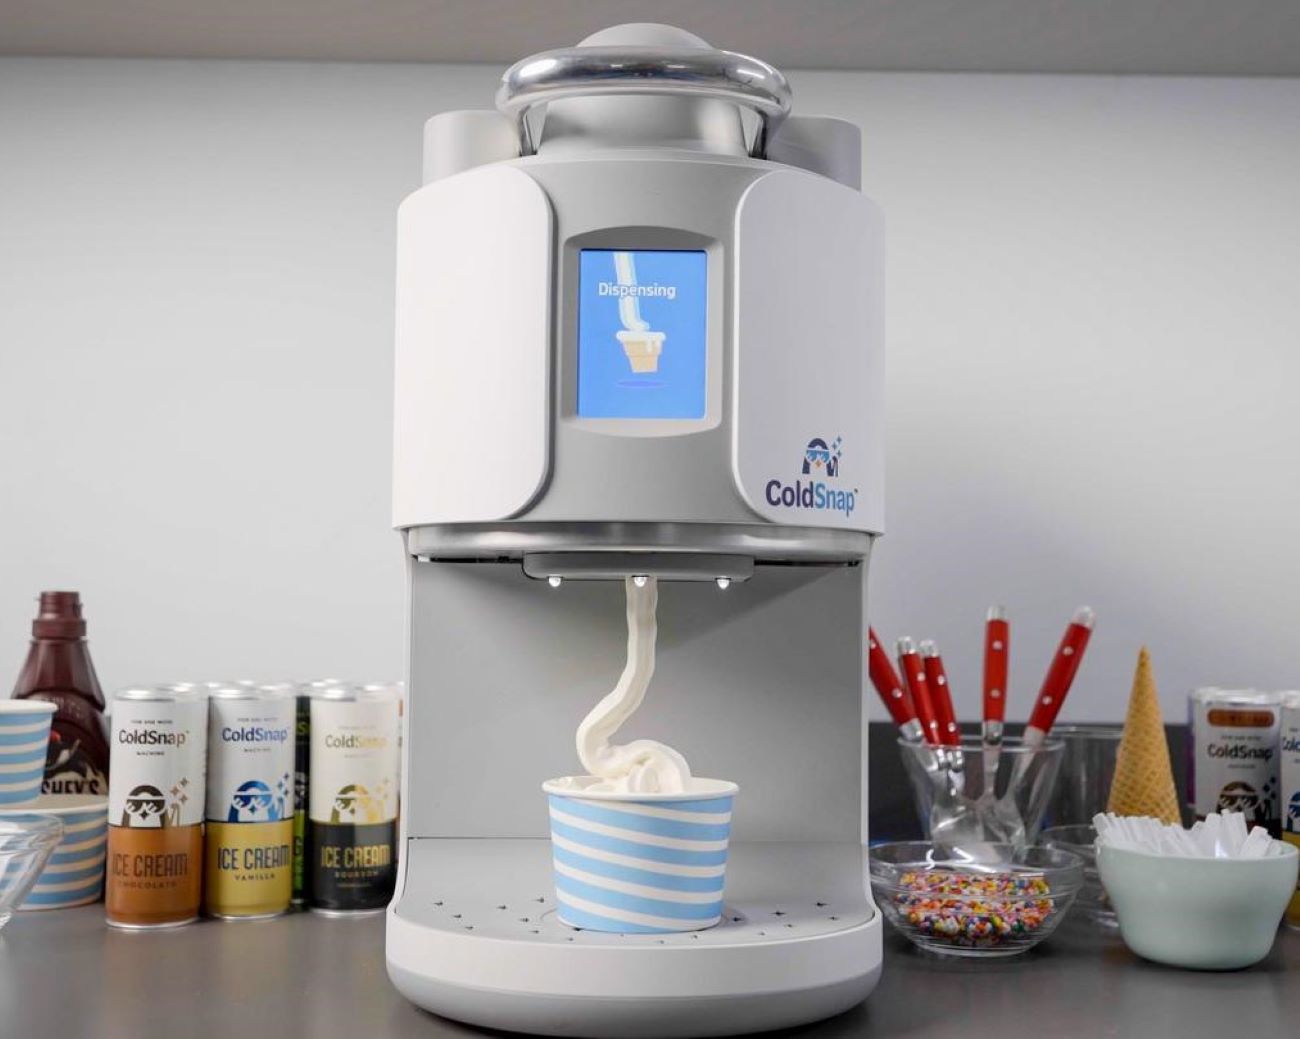 Where To Buy A ColdSnap Ice Cream Machine